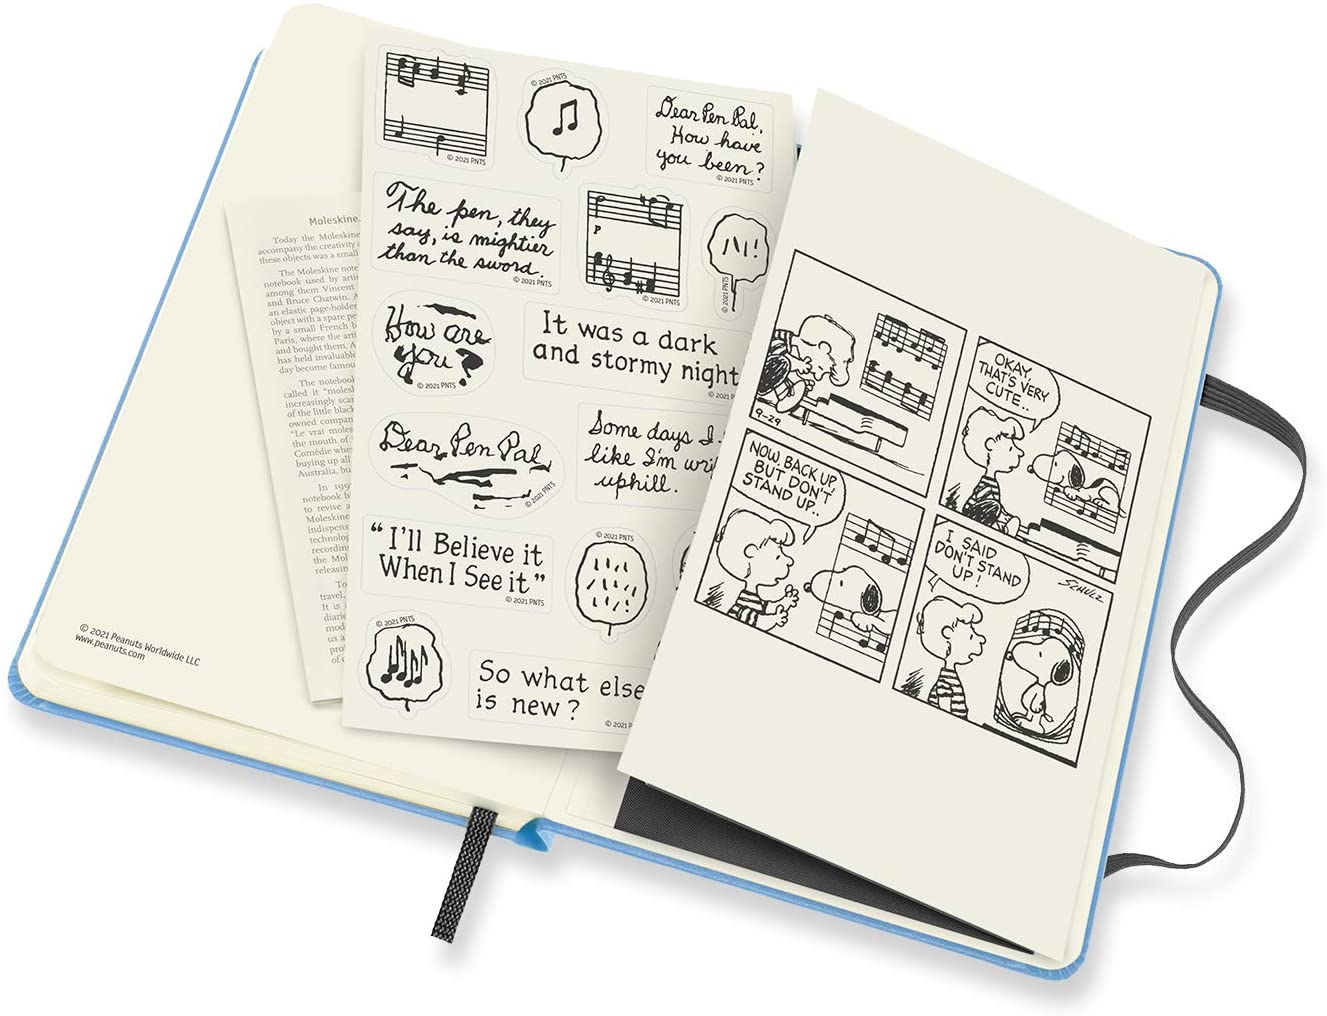 Moleskine Limited Edition Peanuts, 12 Month Weekly Planner, Large